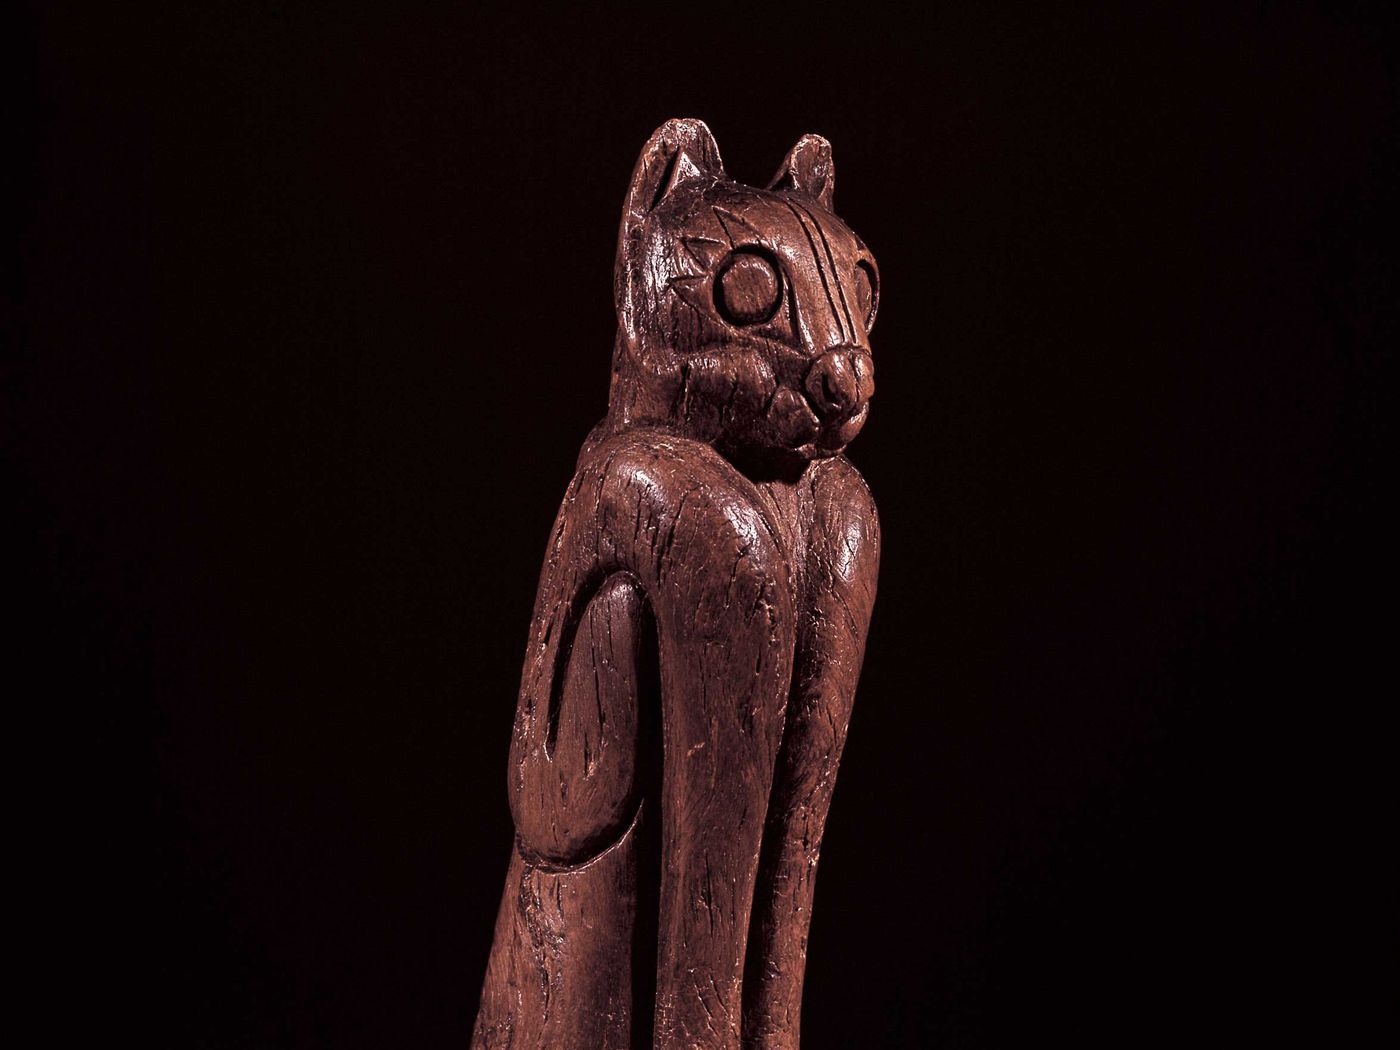 1-Key-Marco-Cat-A240915, Dept-of-Anthropology, Smithsonian-Institution-WEB.jpg